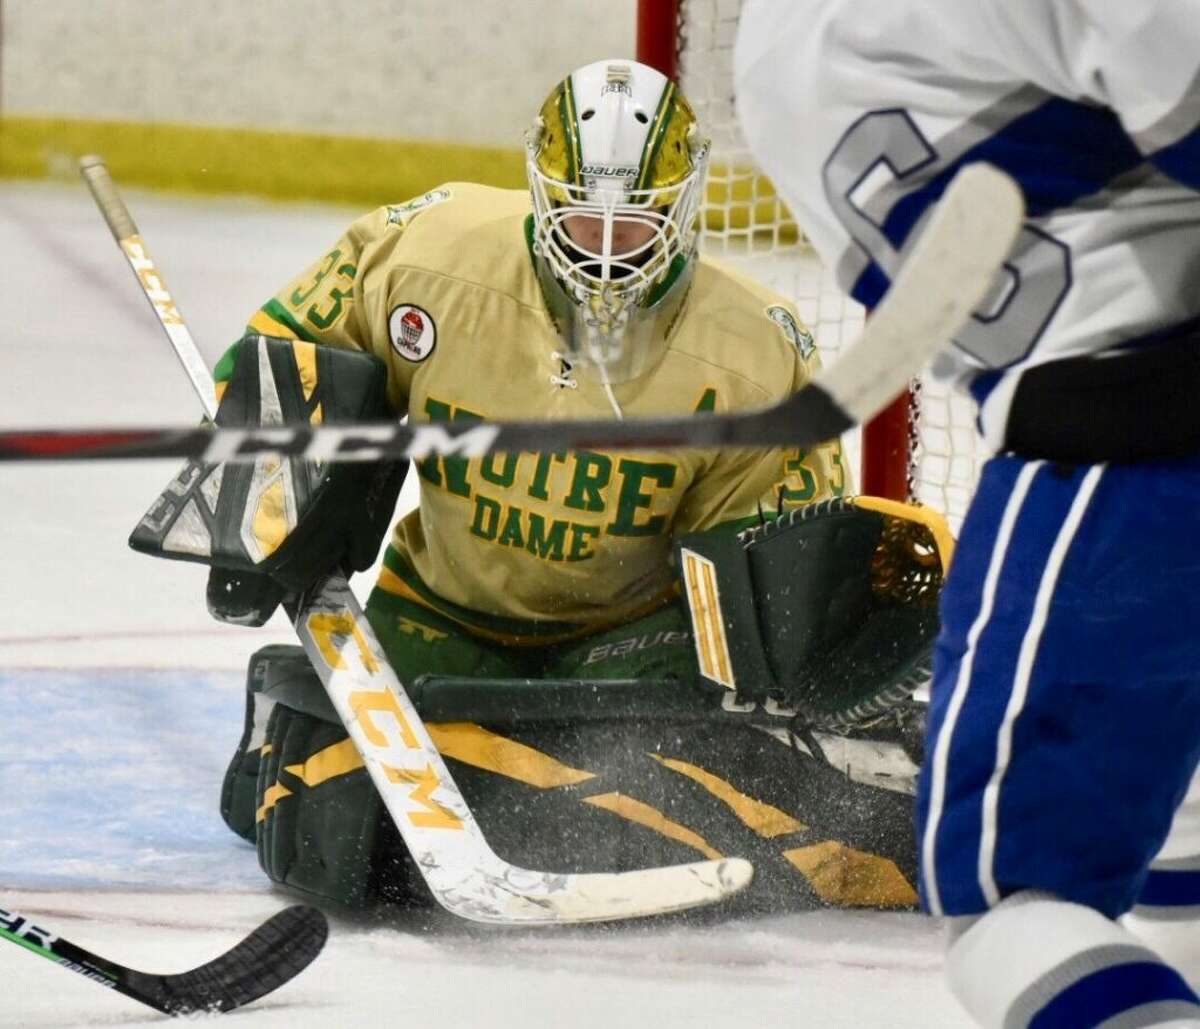 Notre Dame-West Haven goalie Connor Smith makes a save against Darien during a boys ice hockey game at the Darien Ice House on Monday, Feb. 15, 2021.